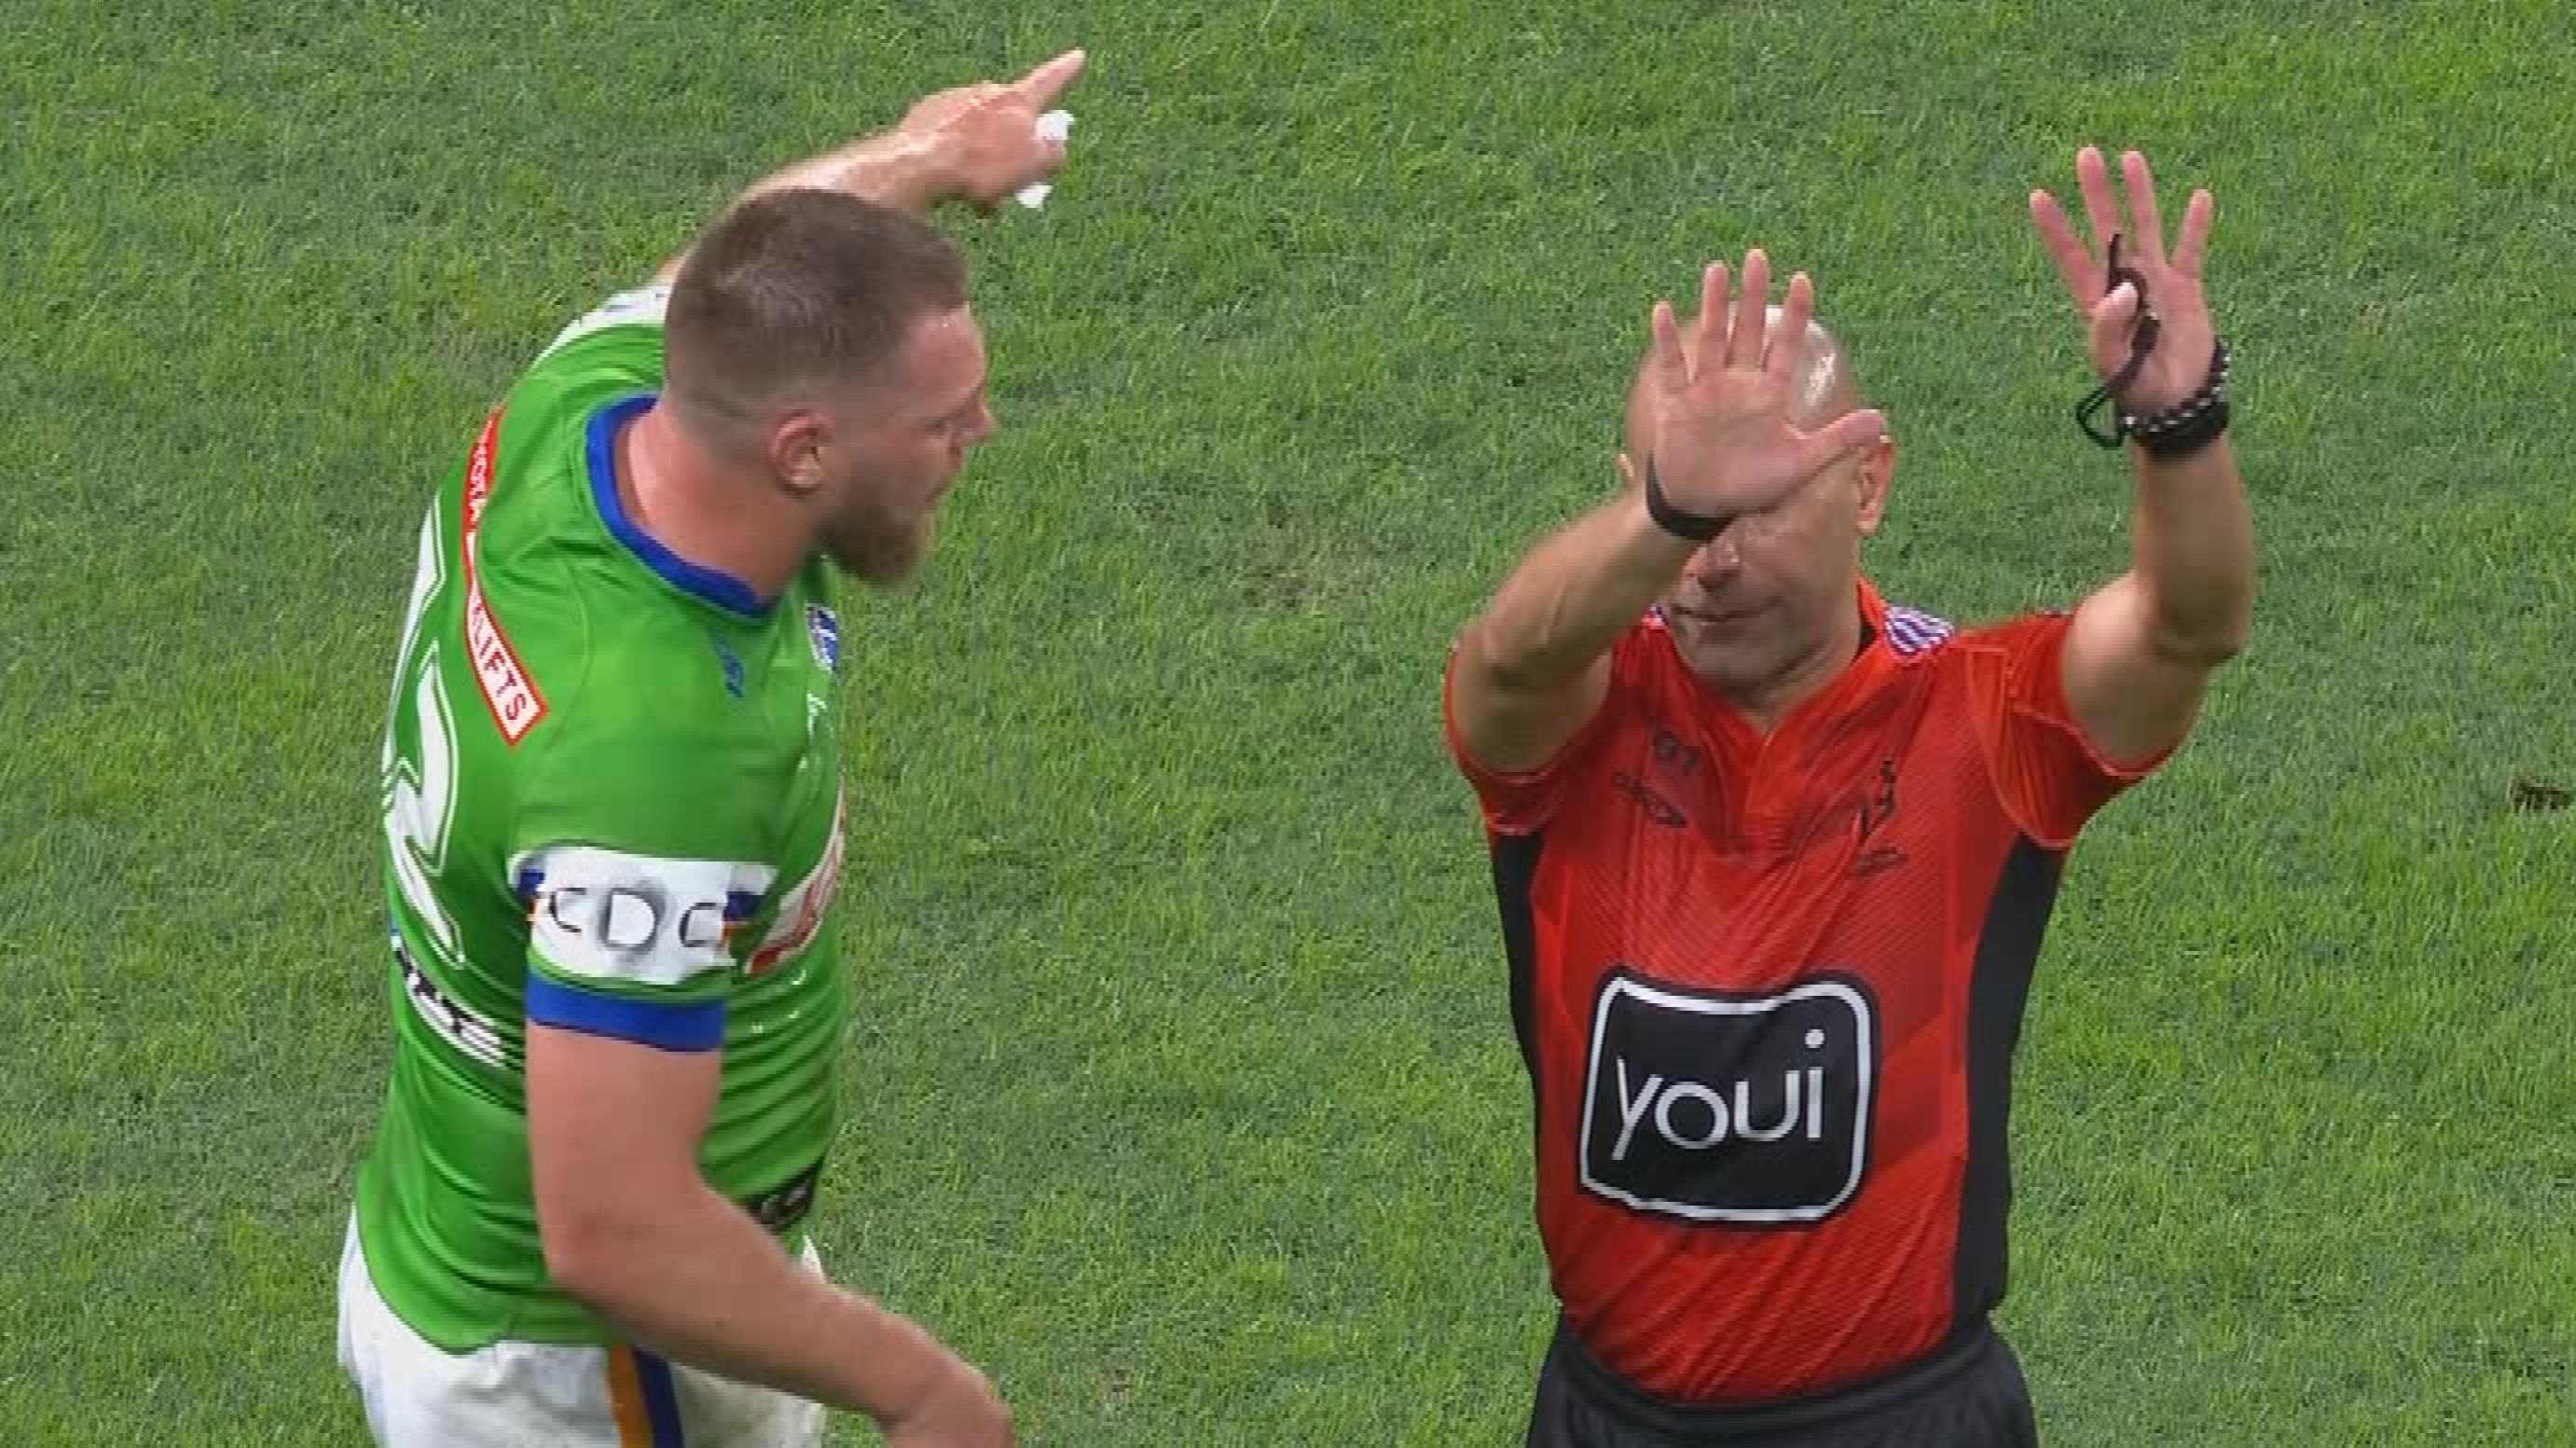 Jordan Rapana is sent to the sin bin for a professional foul.